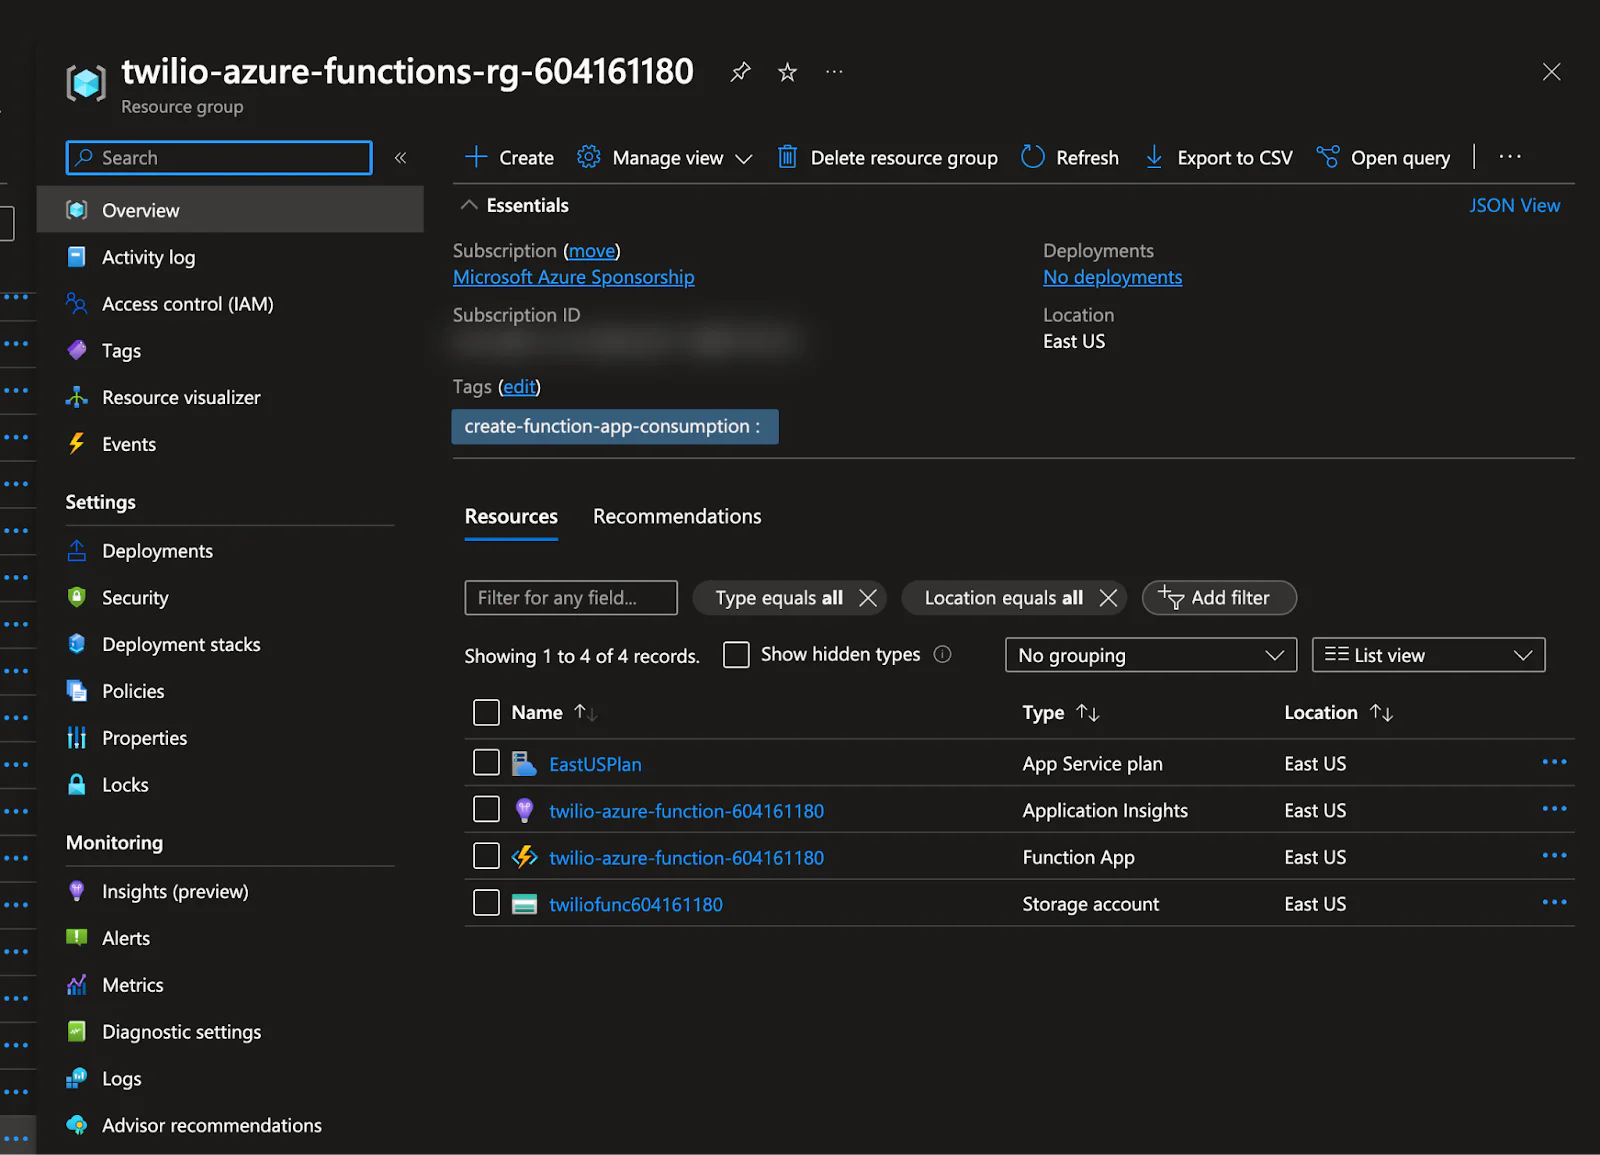 Azure Portal with twilio-azure resource group open with all resources we created.